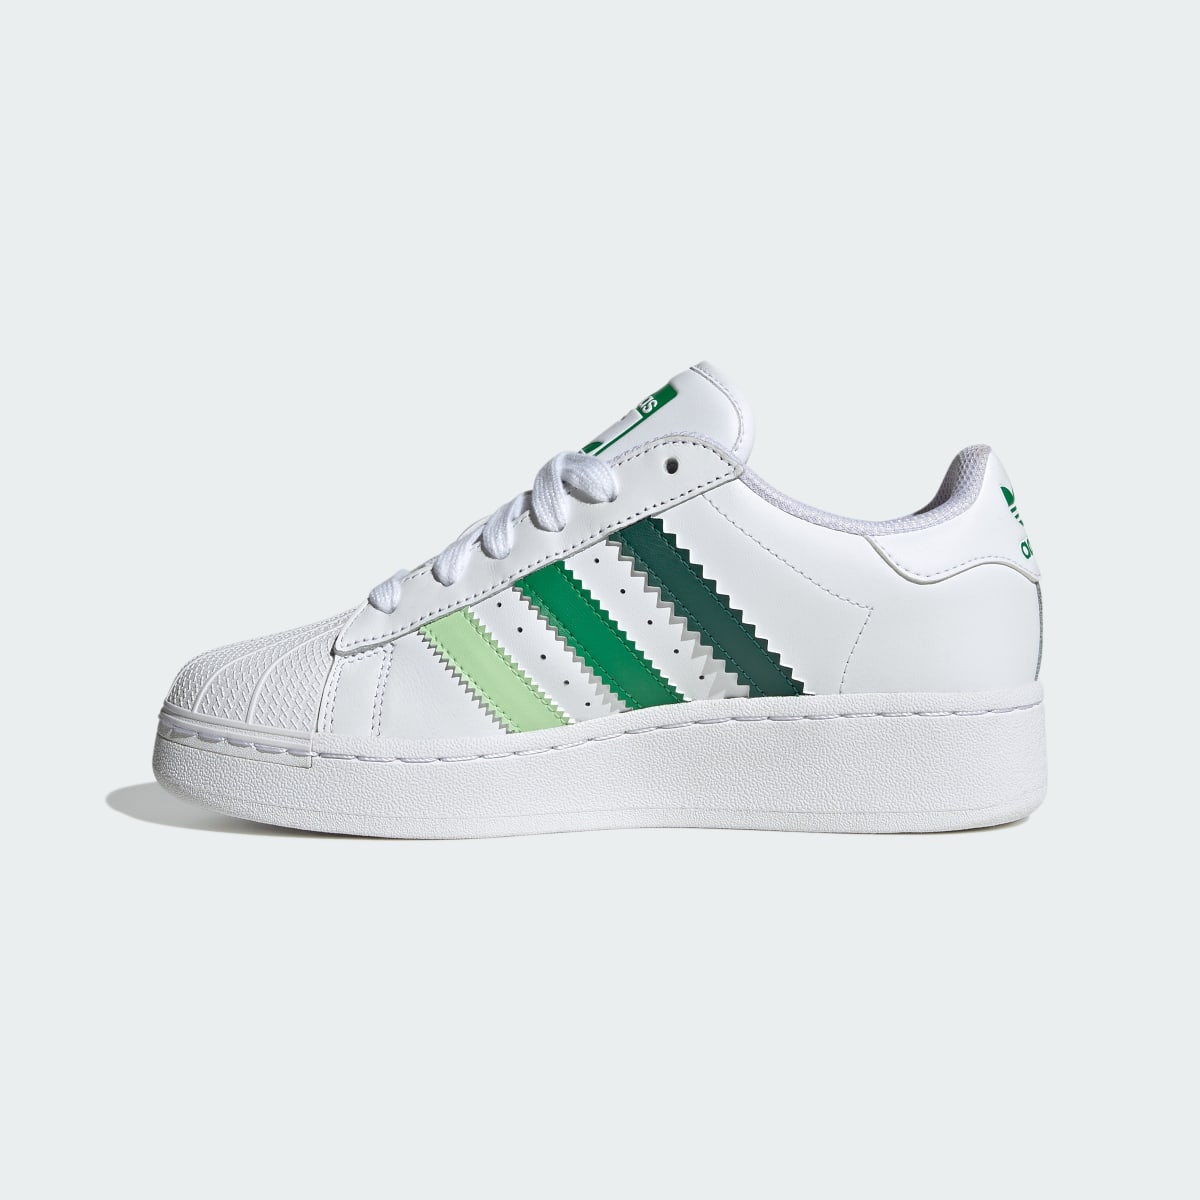 Adidas Superstar XLG Shoes. 7